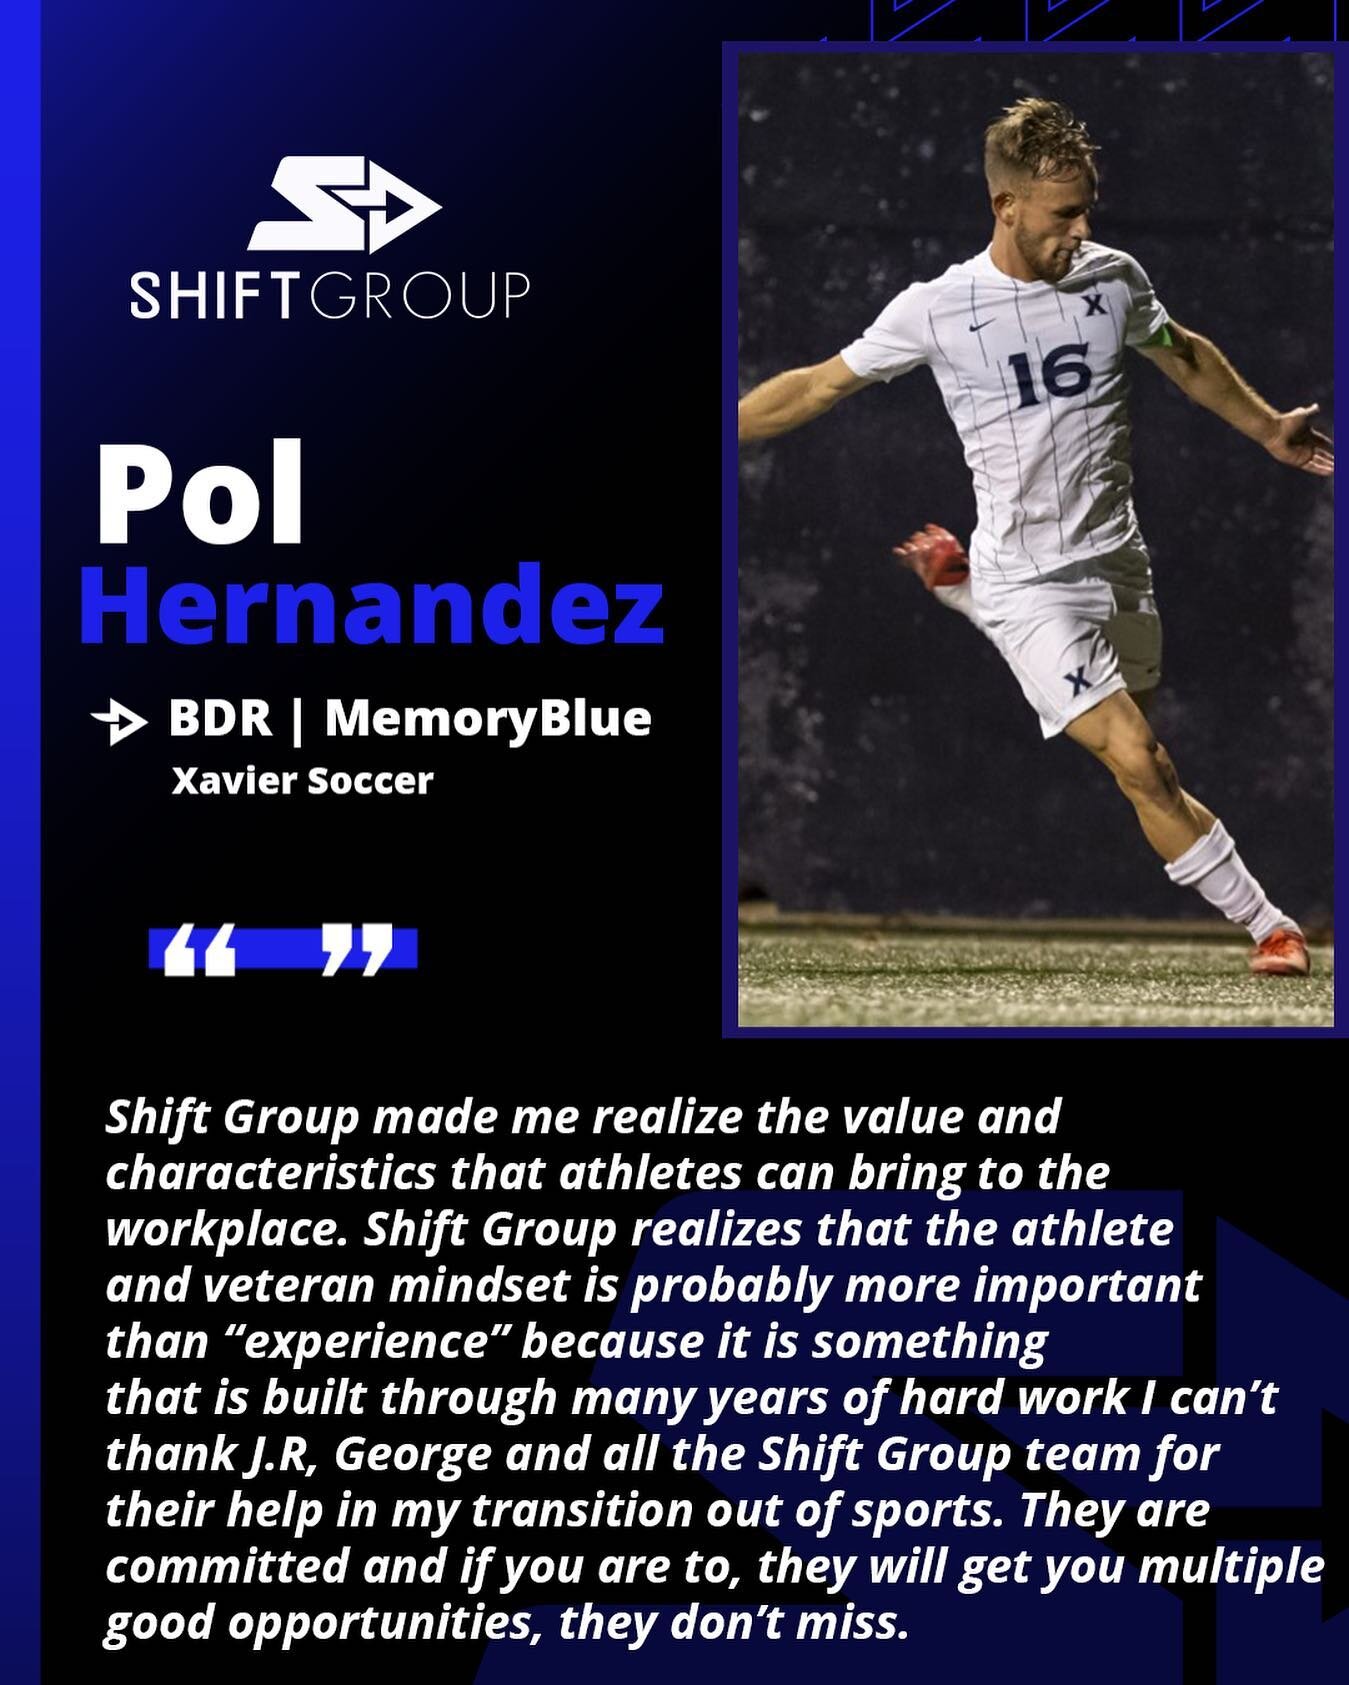 From the soccer field to the sales floor! Congratulations to Pol Hernandez, former college soccer player at Xavier, on his new role with our partner MemoryBlue!
&bull;
&bull;
#careerdevelopment #salestraining #careertransition #salesjobs